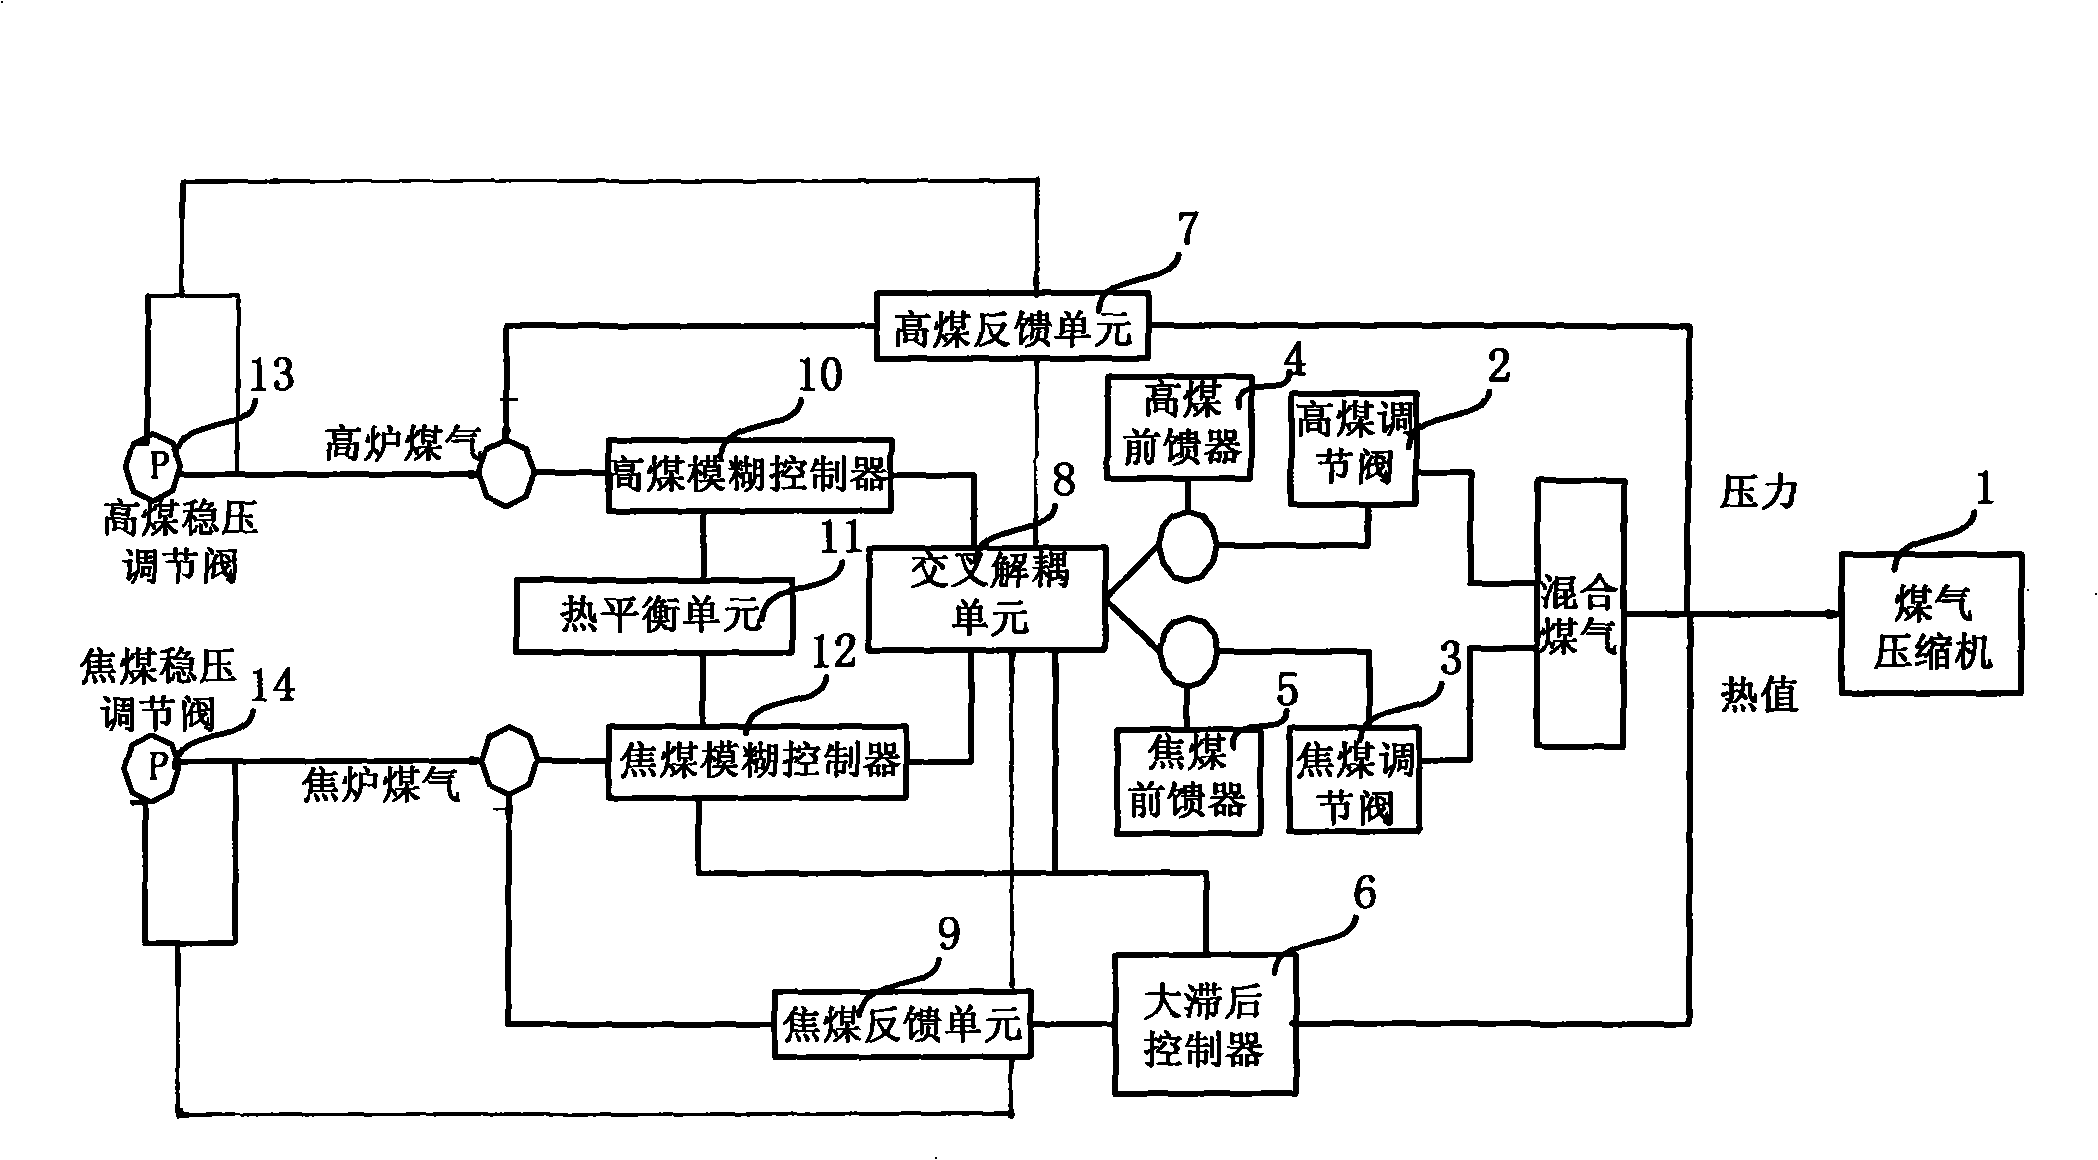 Mixed gas thermal value control system and method